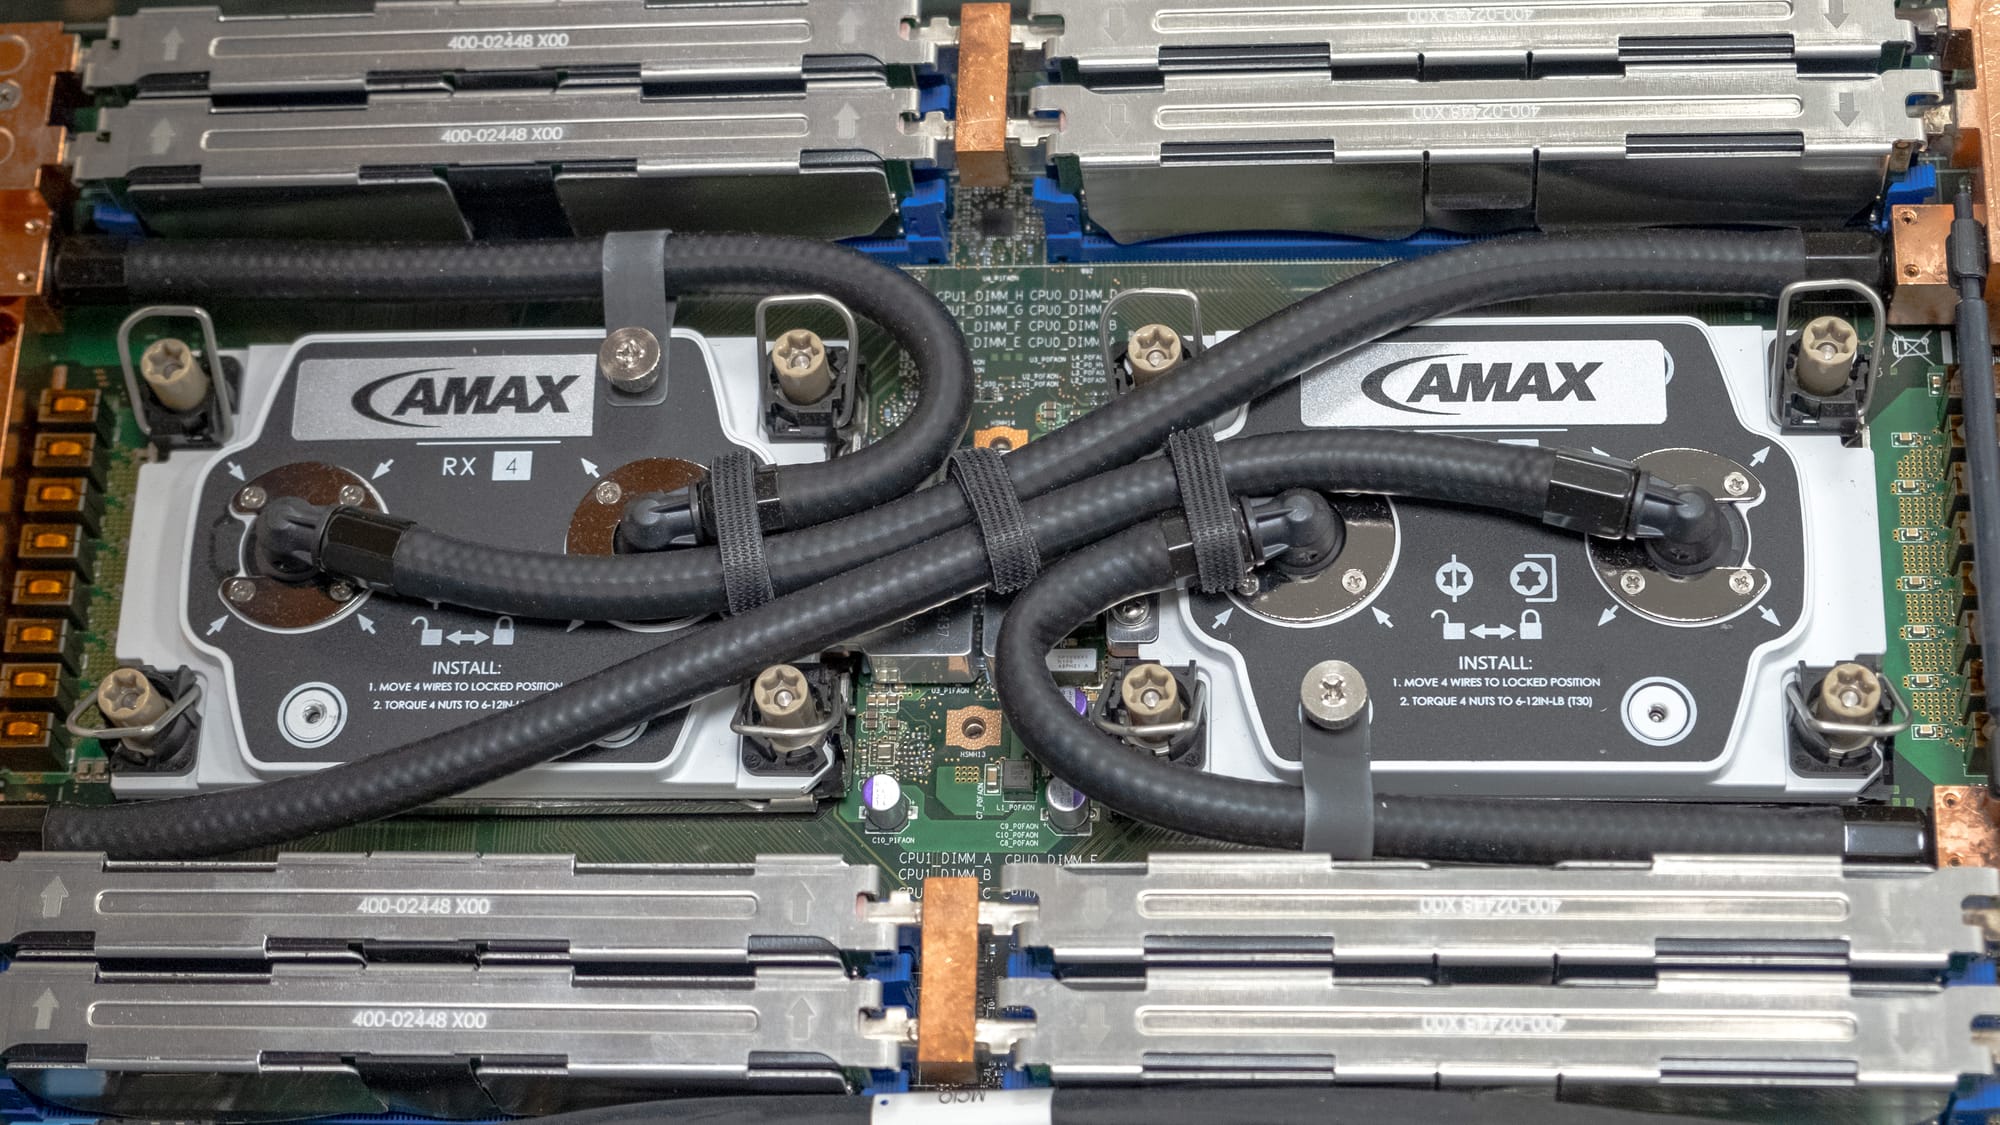 Close-up of a server's internal hardware featuring dual AMAX liquid cooling systems atop CPUs, surrounded by RAM modules and power cables.